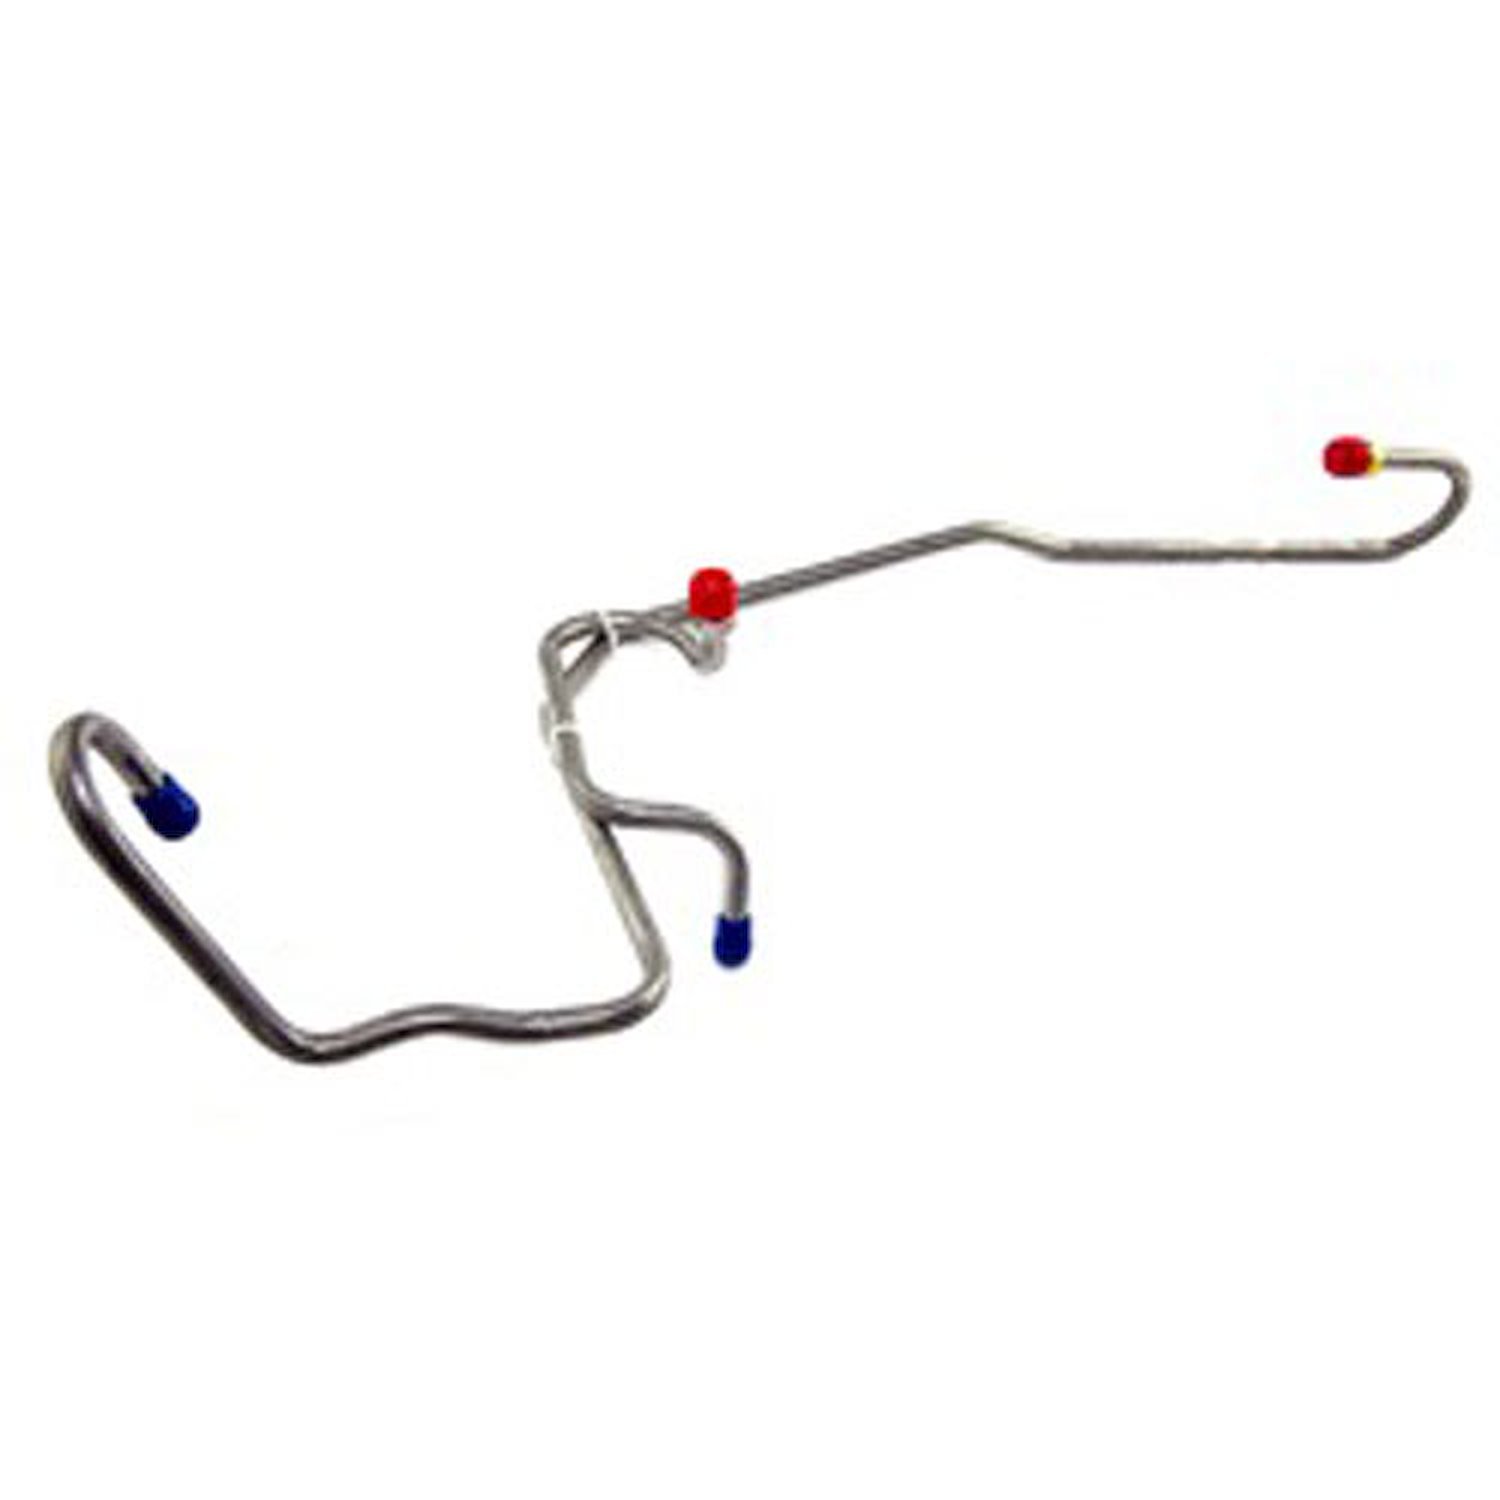 Replacement fuel line from Omix-ADA connects fuel pump to carb., Fits 76-81 Jeep CJ7 with a 304 cubic inch engine.